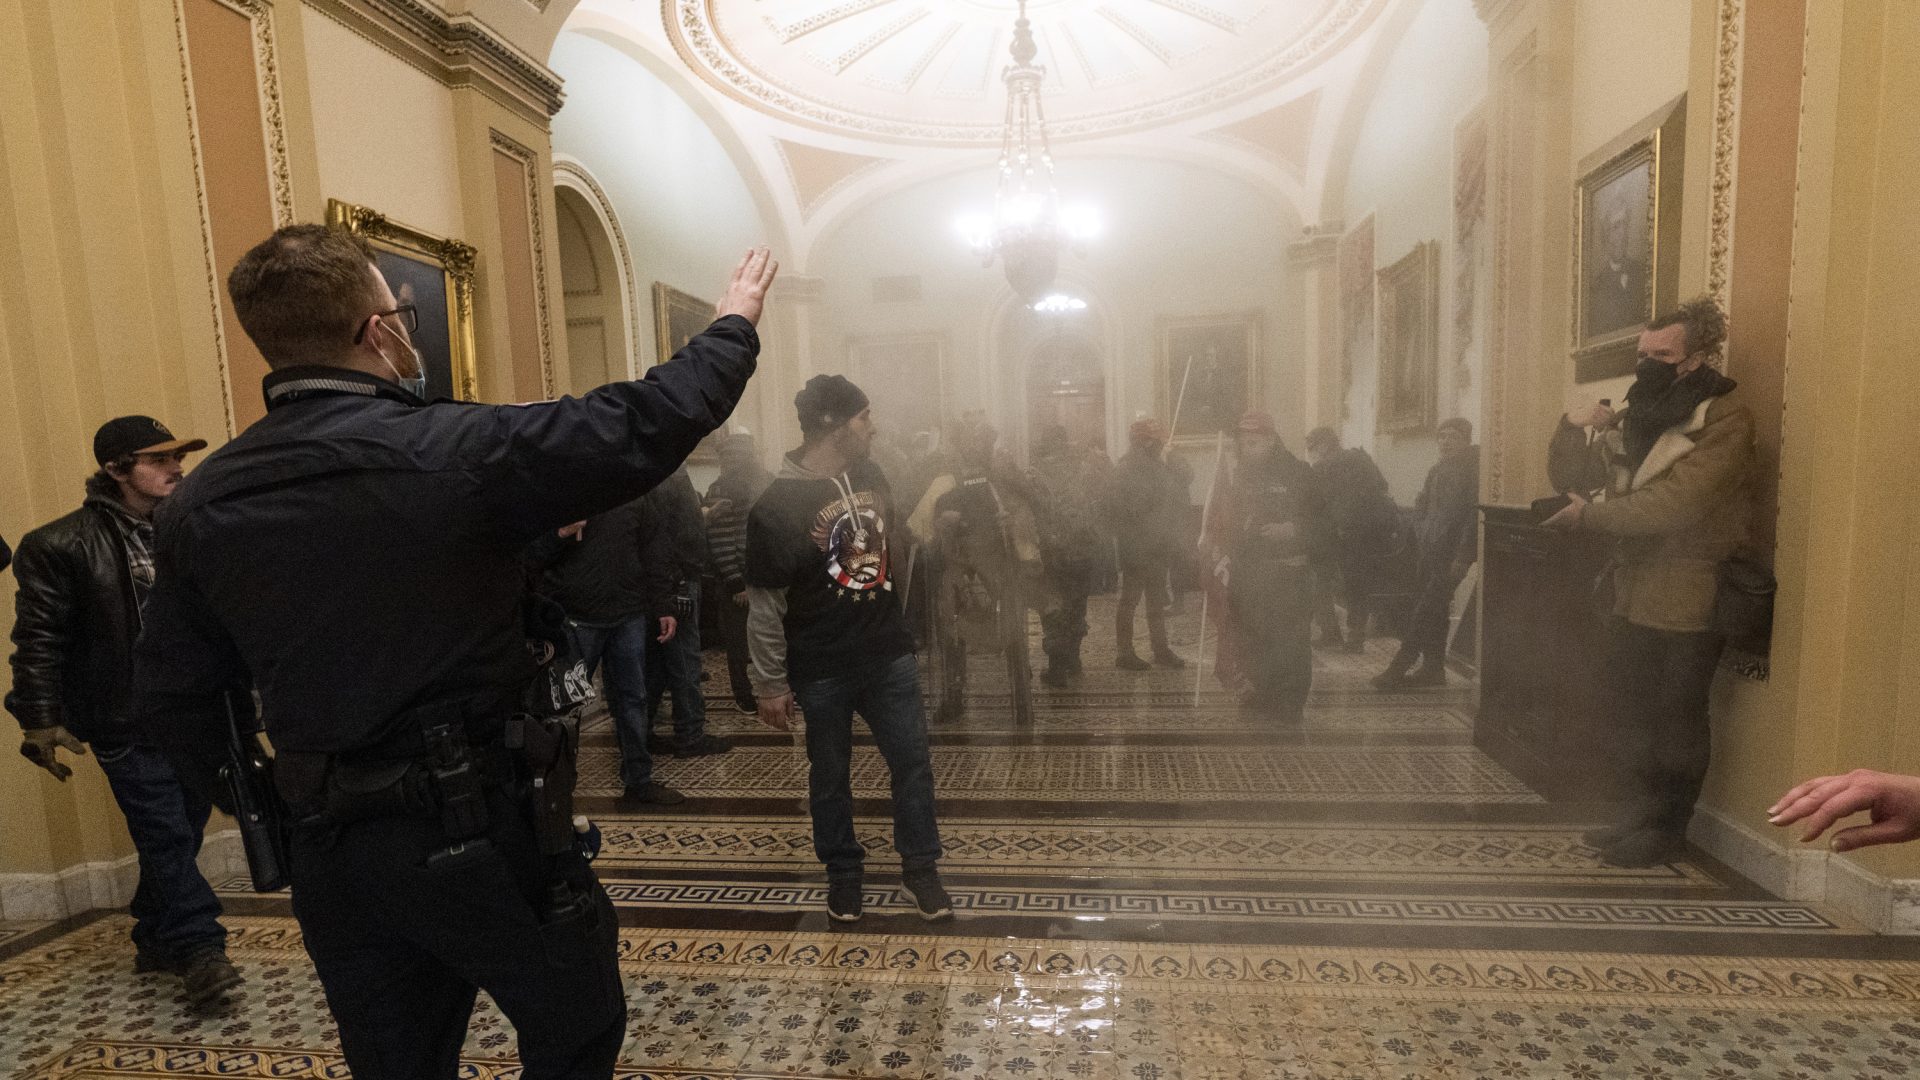 FILE PHOTO: Smoke fills the walkway outside the Senate chamber as U.S. Capitol Police confront rioters inside the Capitol on Jan. 6, 2021.